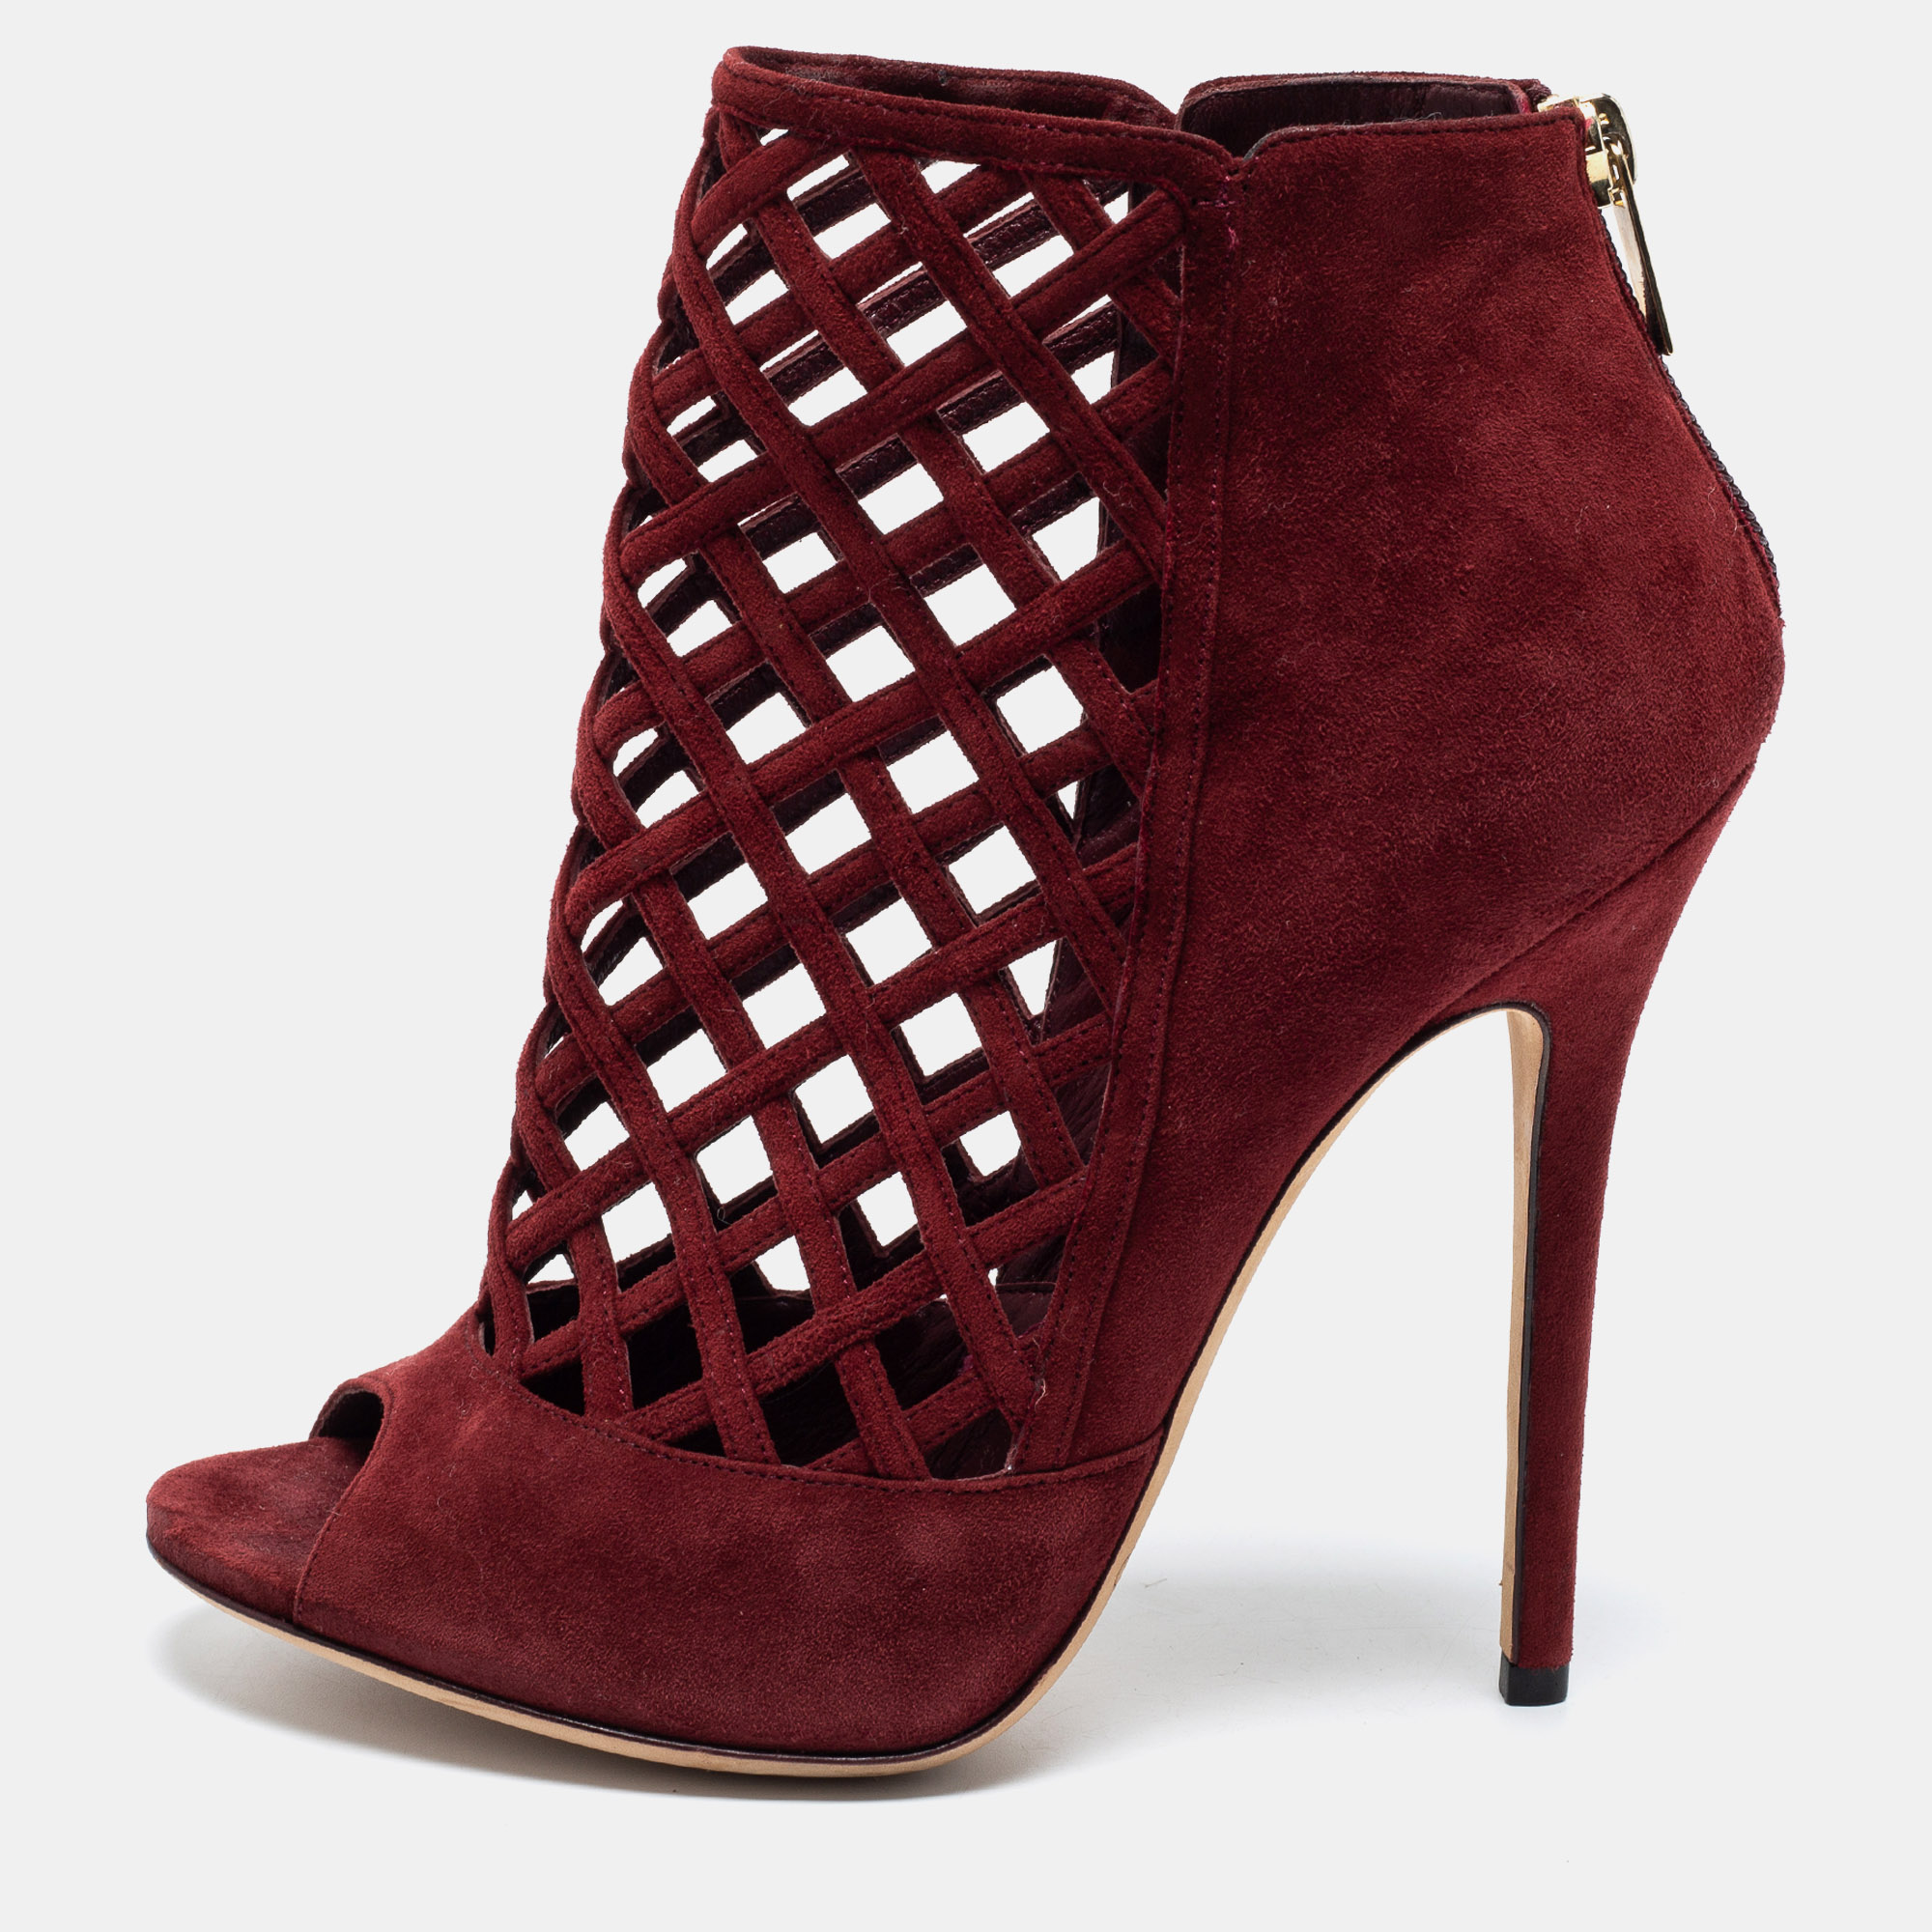 

Jimmy Choo Burgundy Suede Drift Cut-Out Peep-Toe Ankle Booties Size